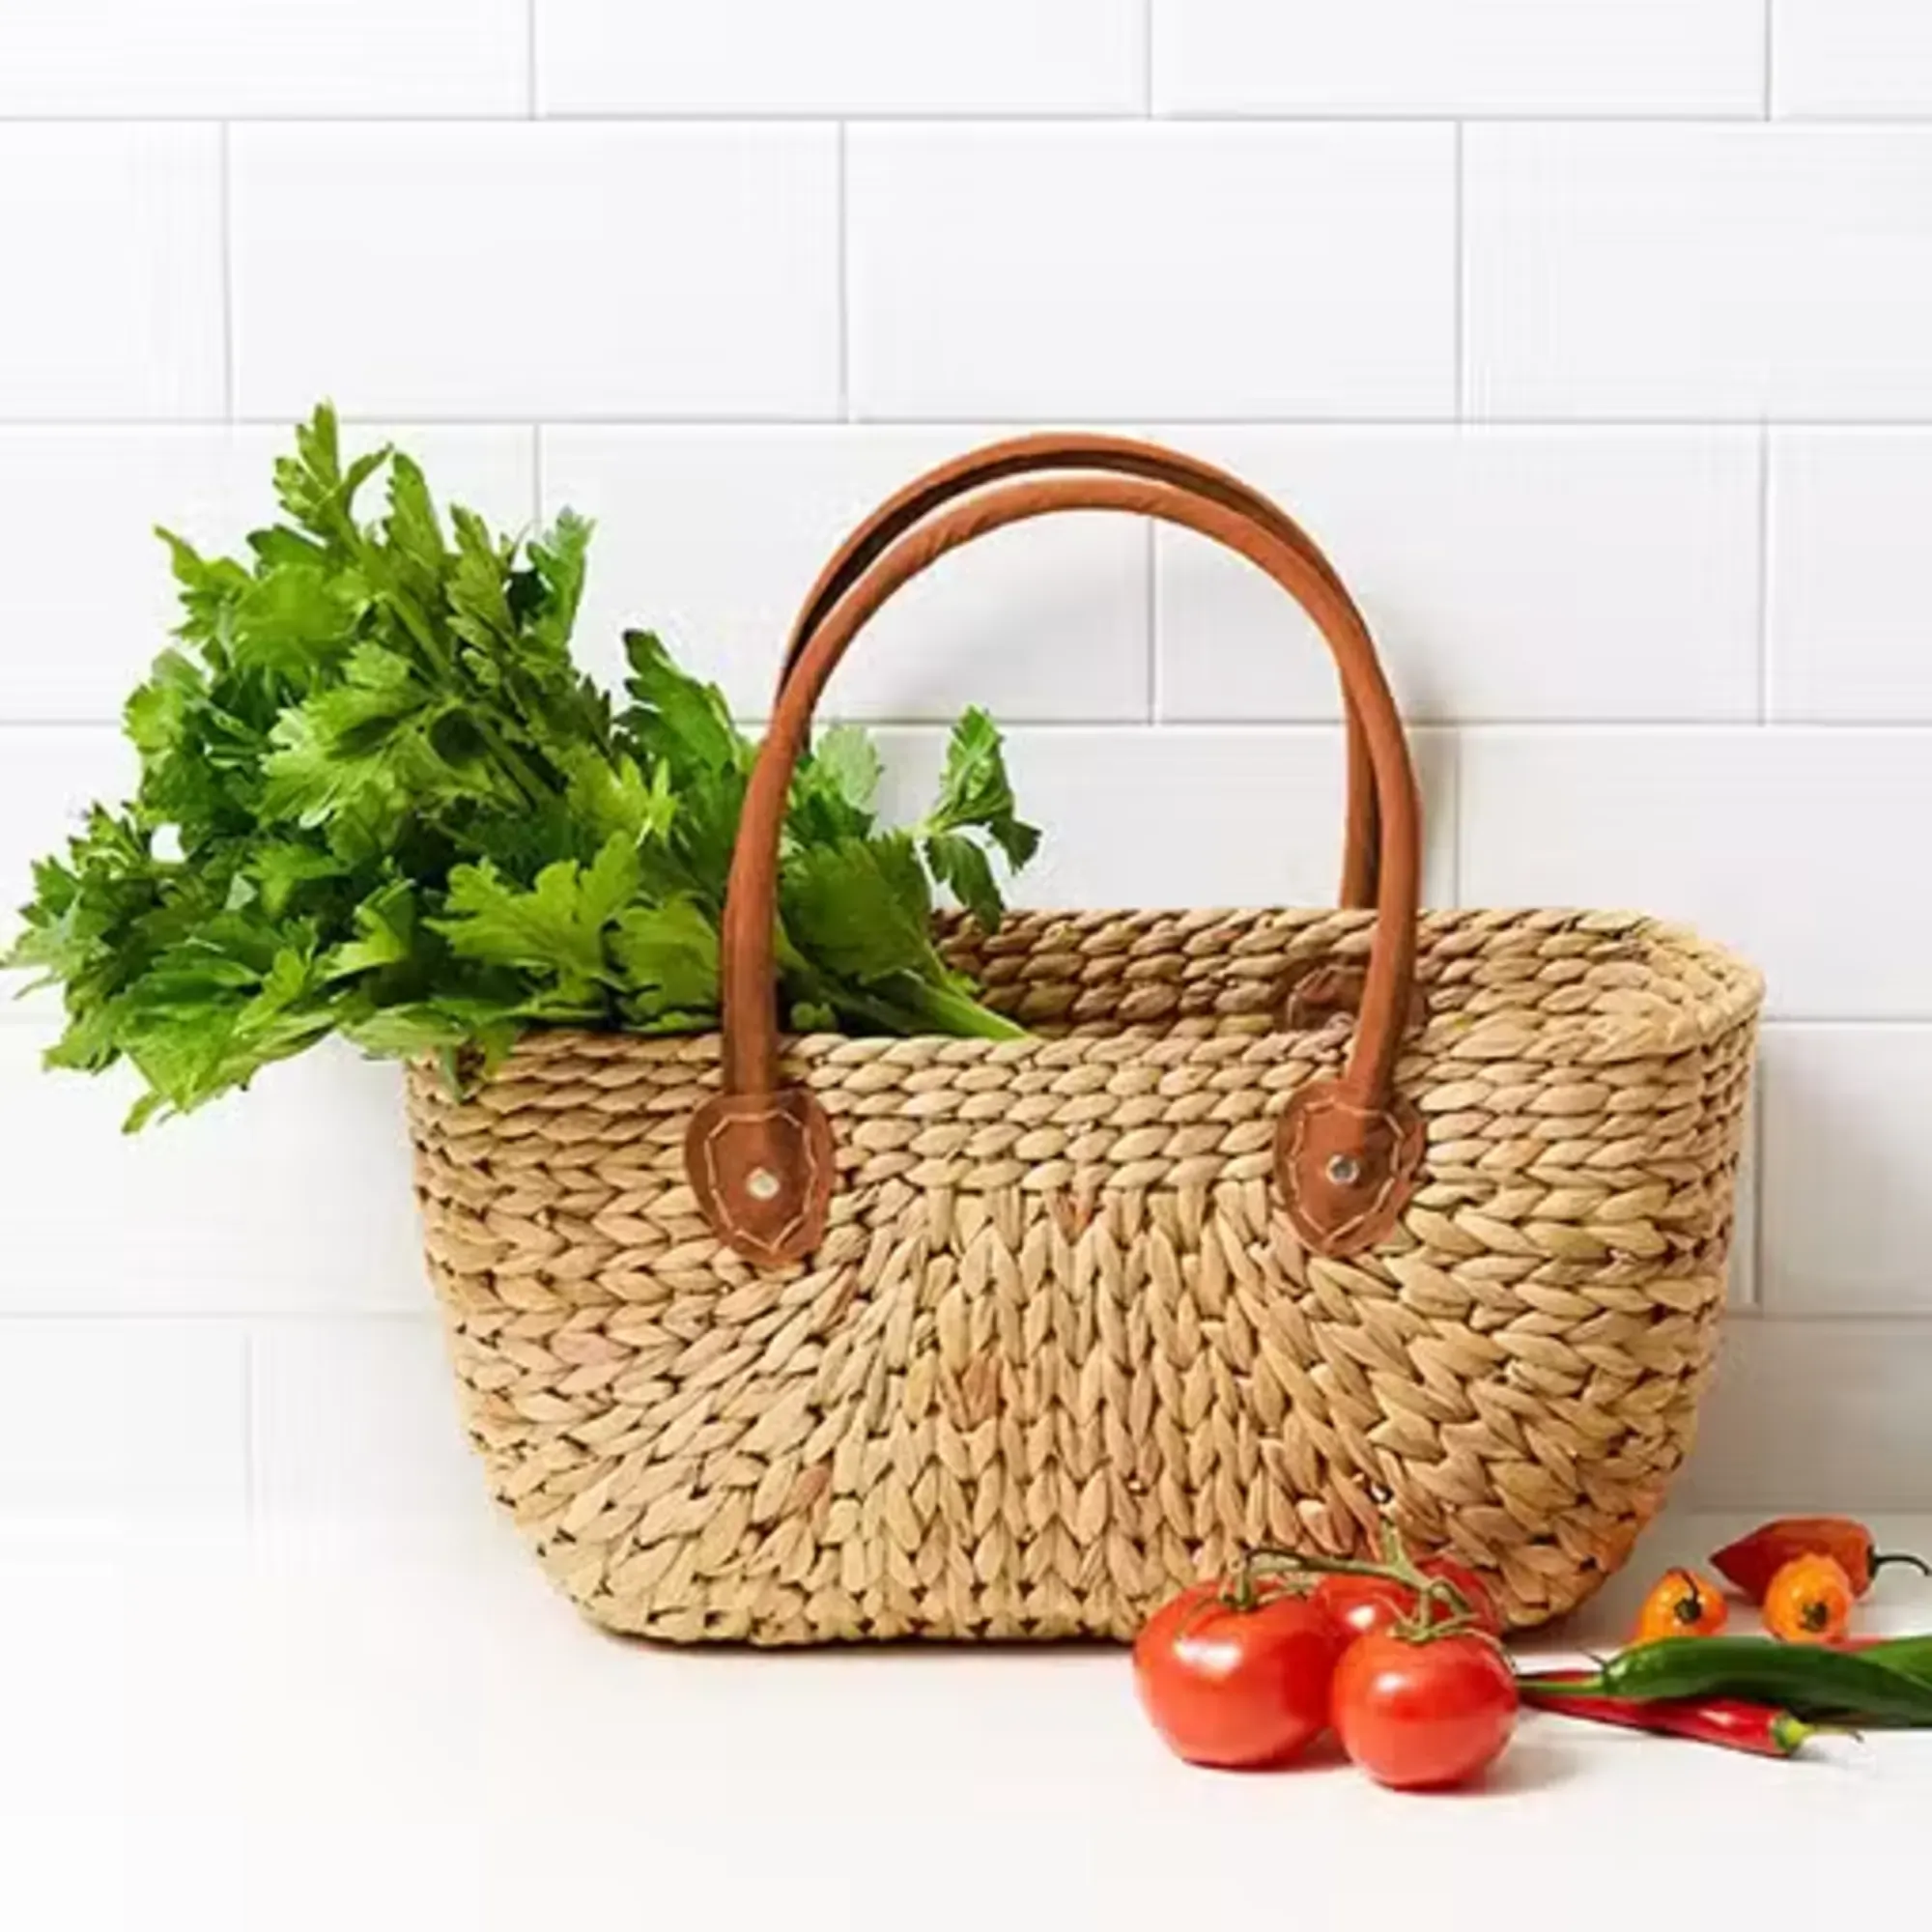 Living-Outdoor-Living-Carry-Bags-and-Baskets.jpg